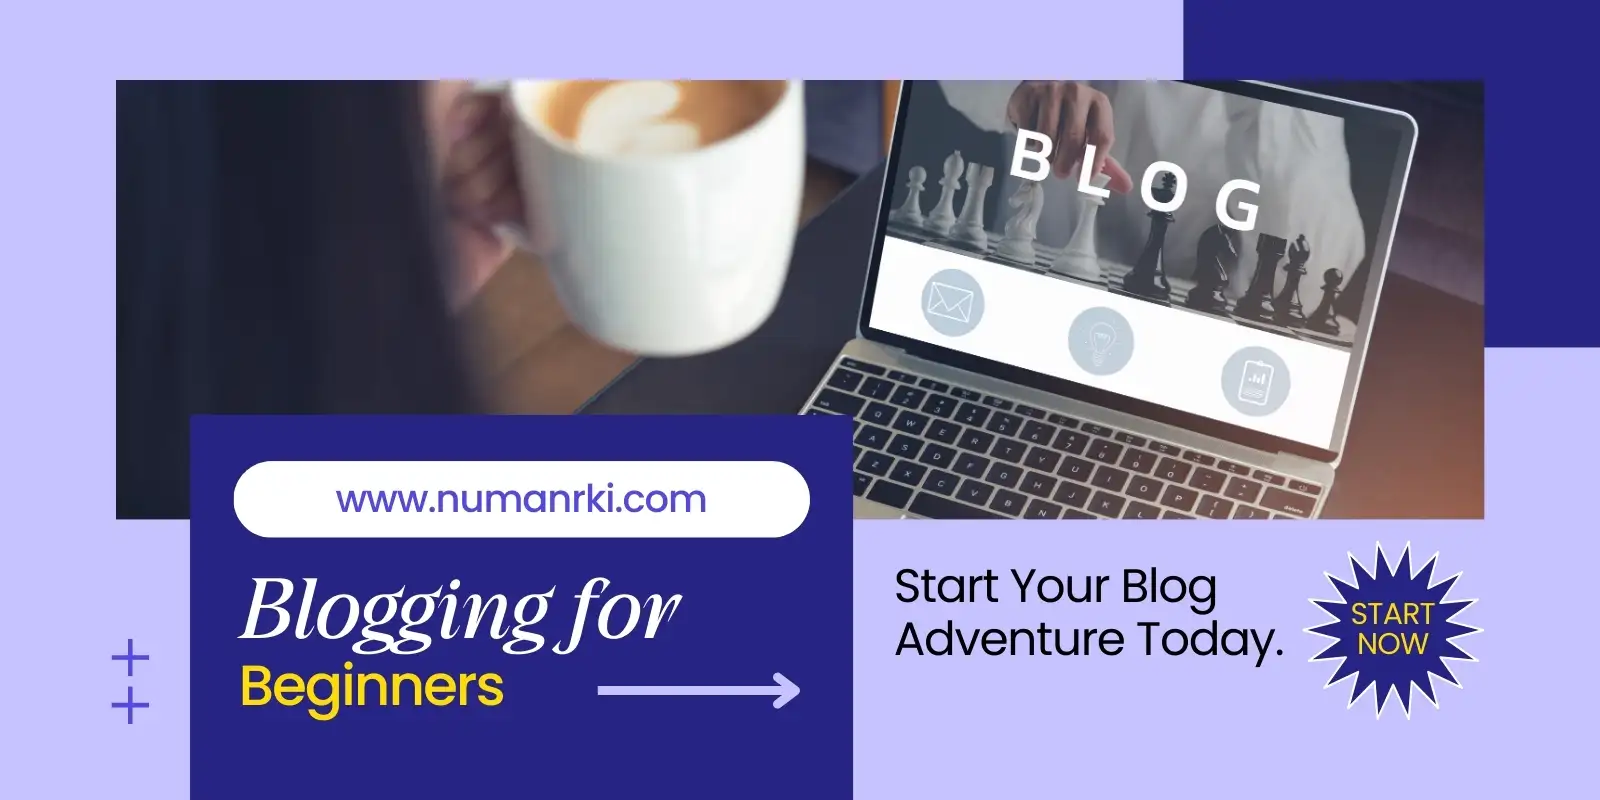 A step-by-step guide on starting your blog for beginners. Learn the basics of blogging and get started today!